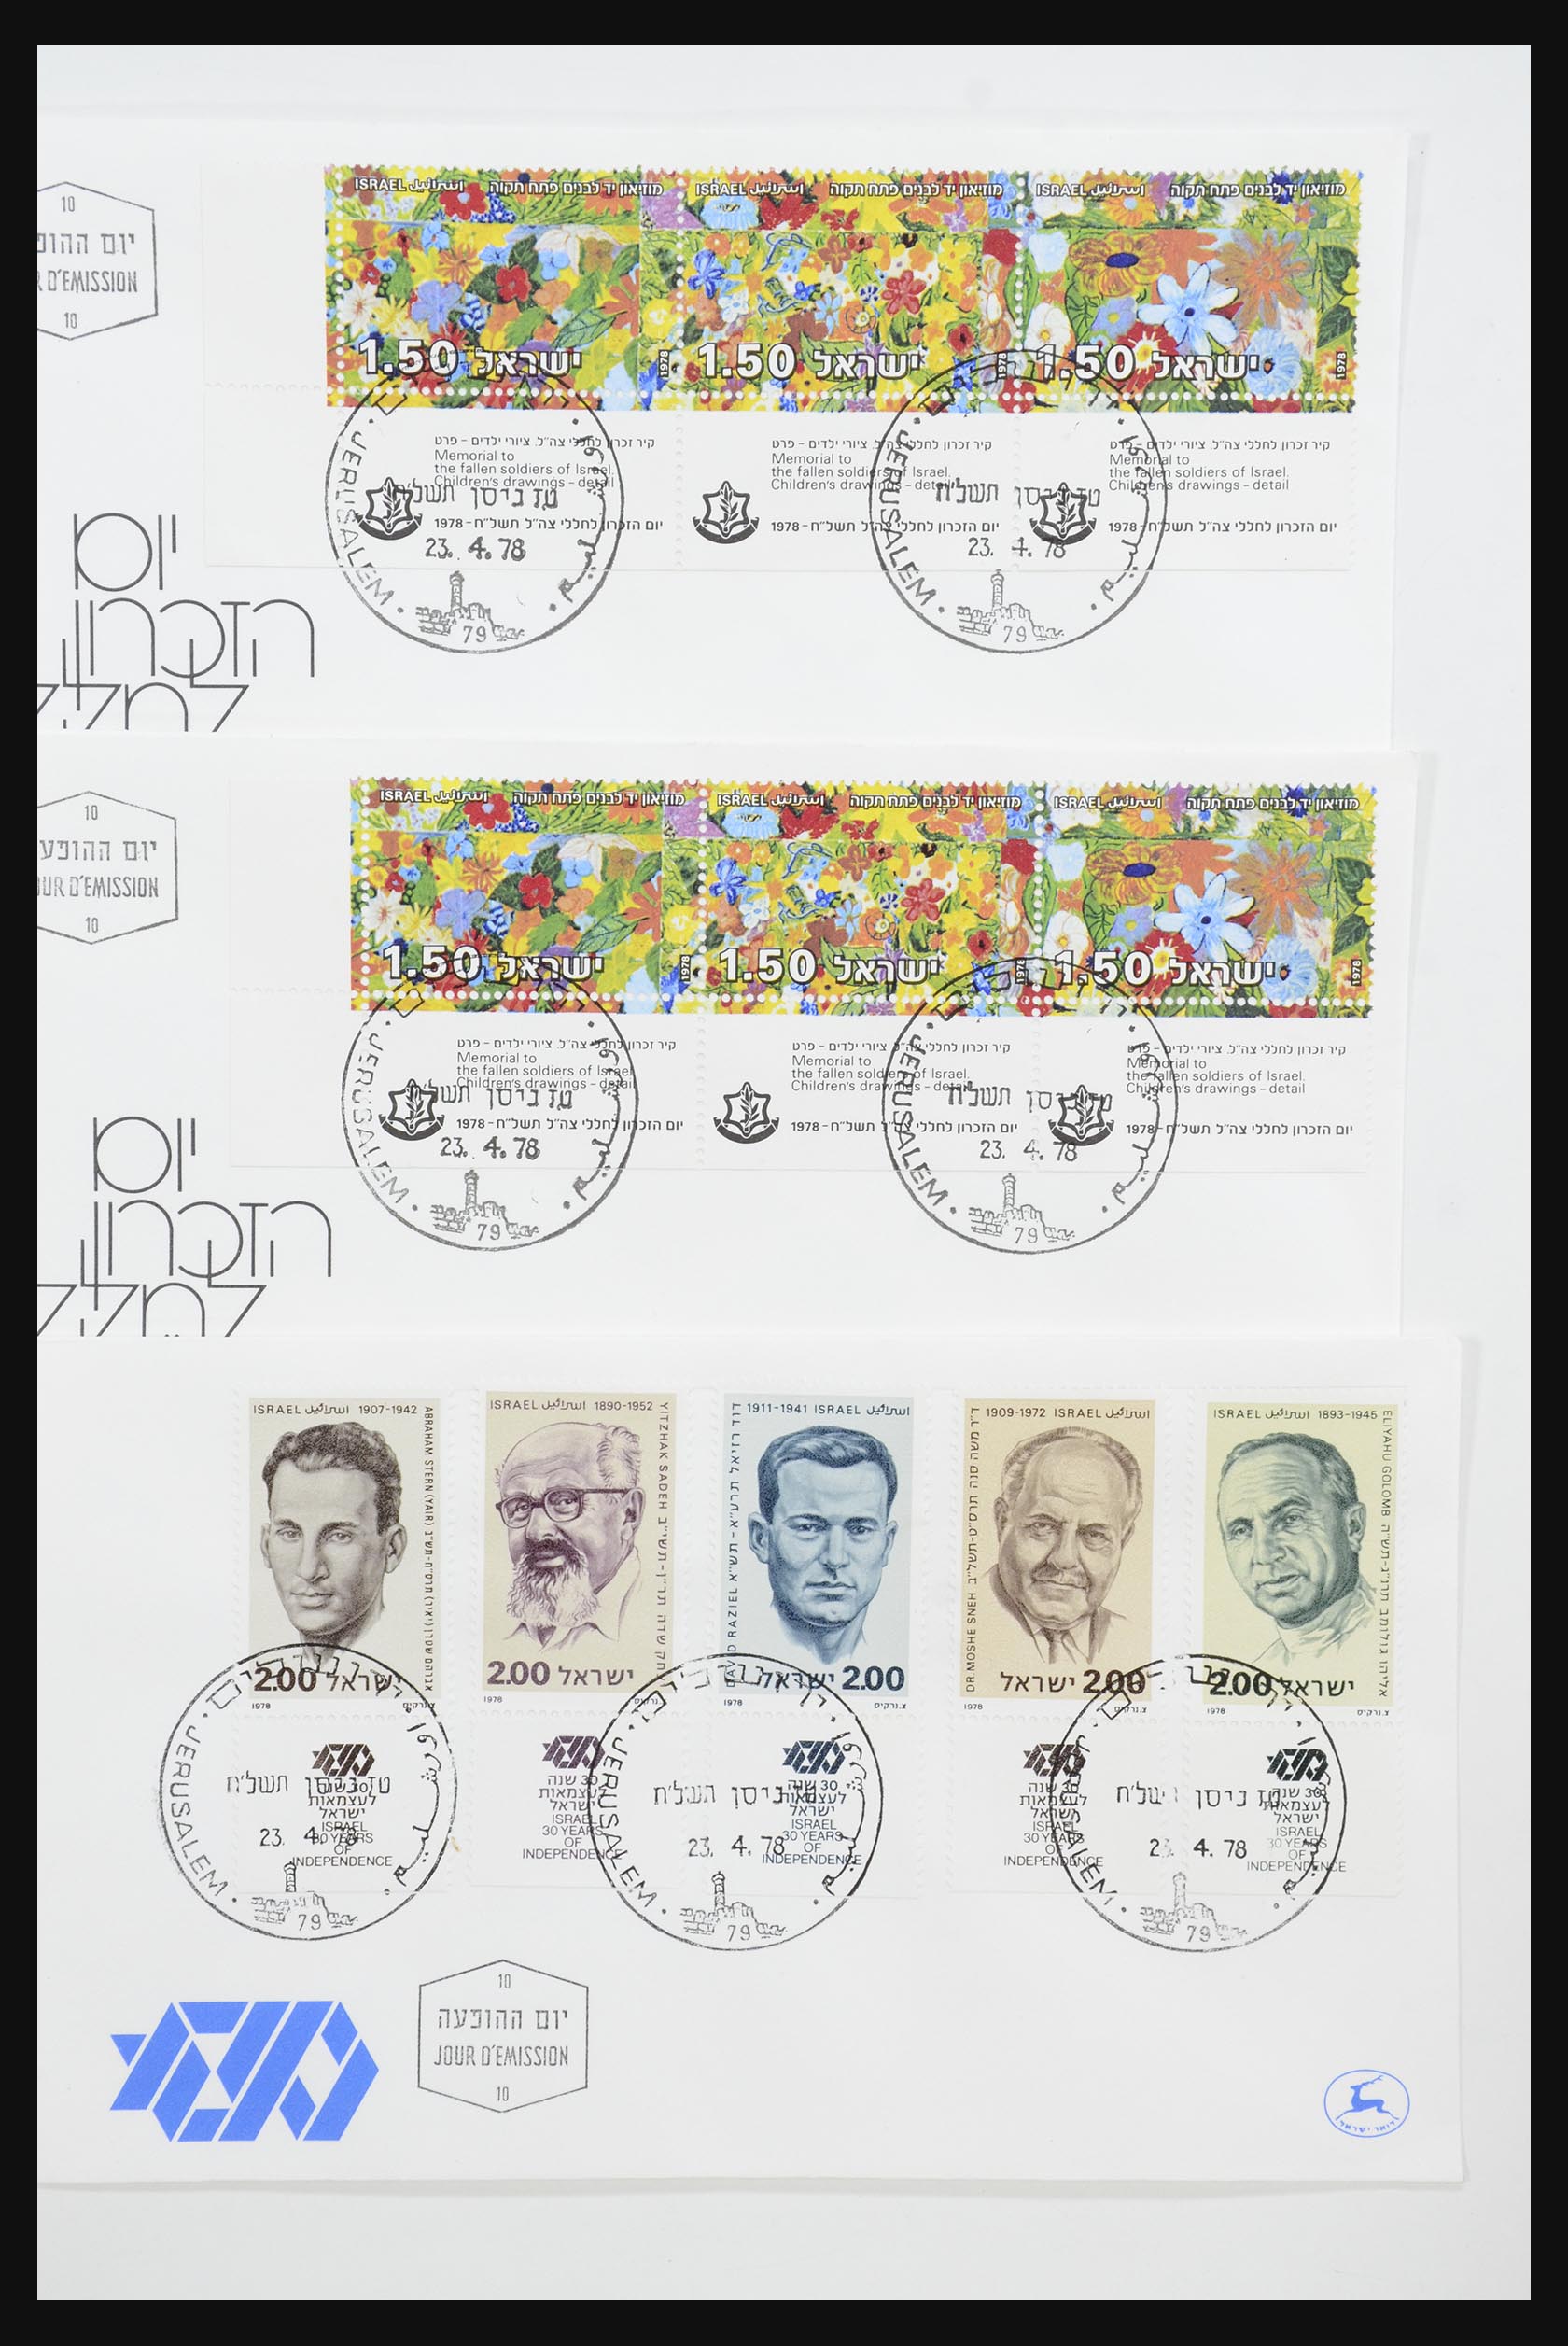 31924 006 - 31924 Israël fdc-collectie 1957-2003.